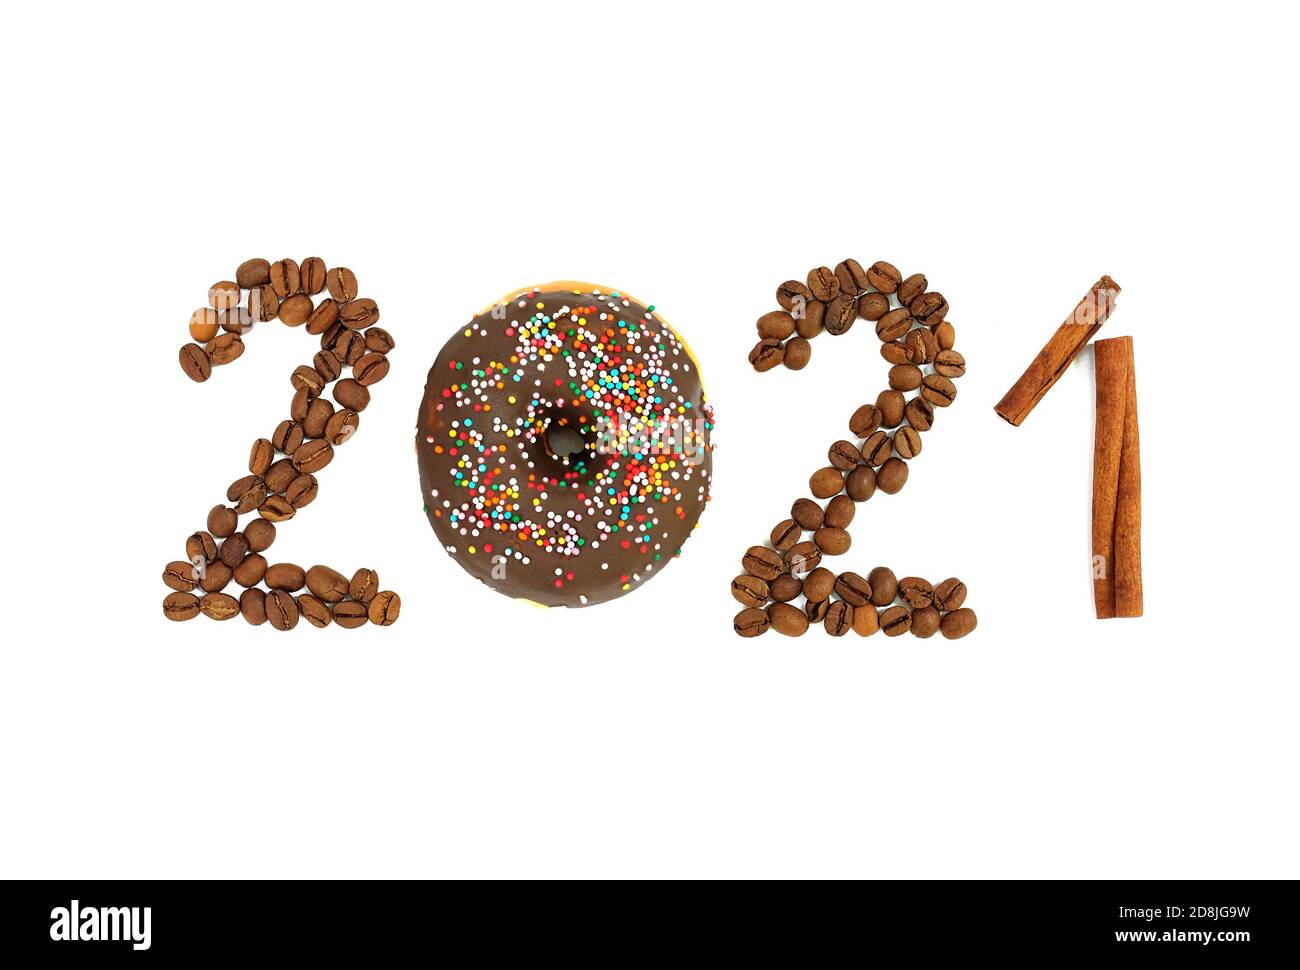 New year 2021 made of donut, coffee beans and cinnamon sticks on the white background. Stock Photo